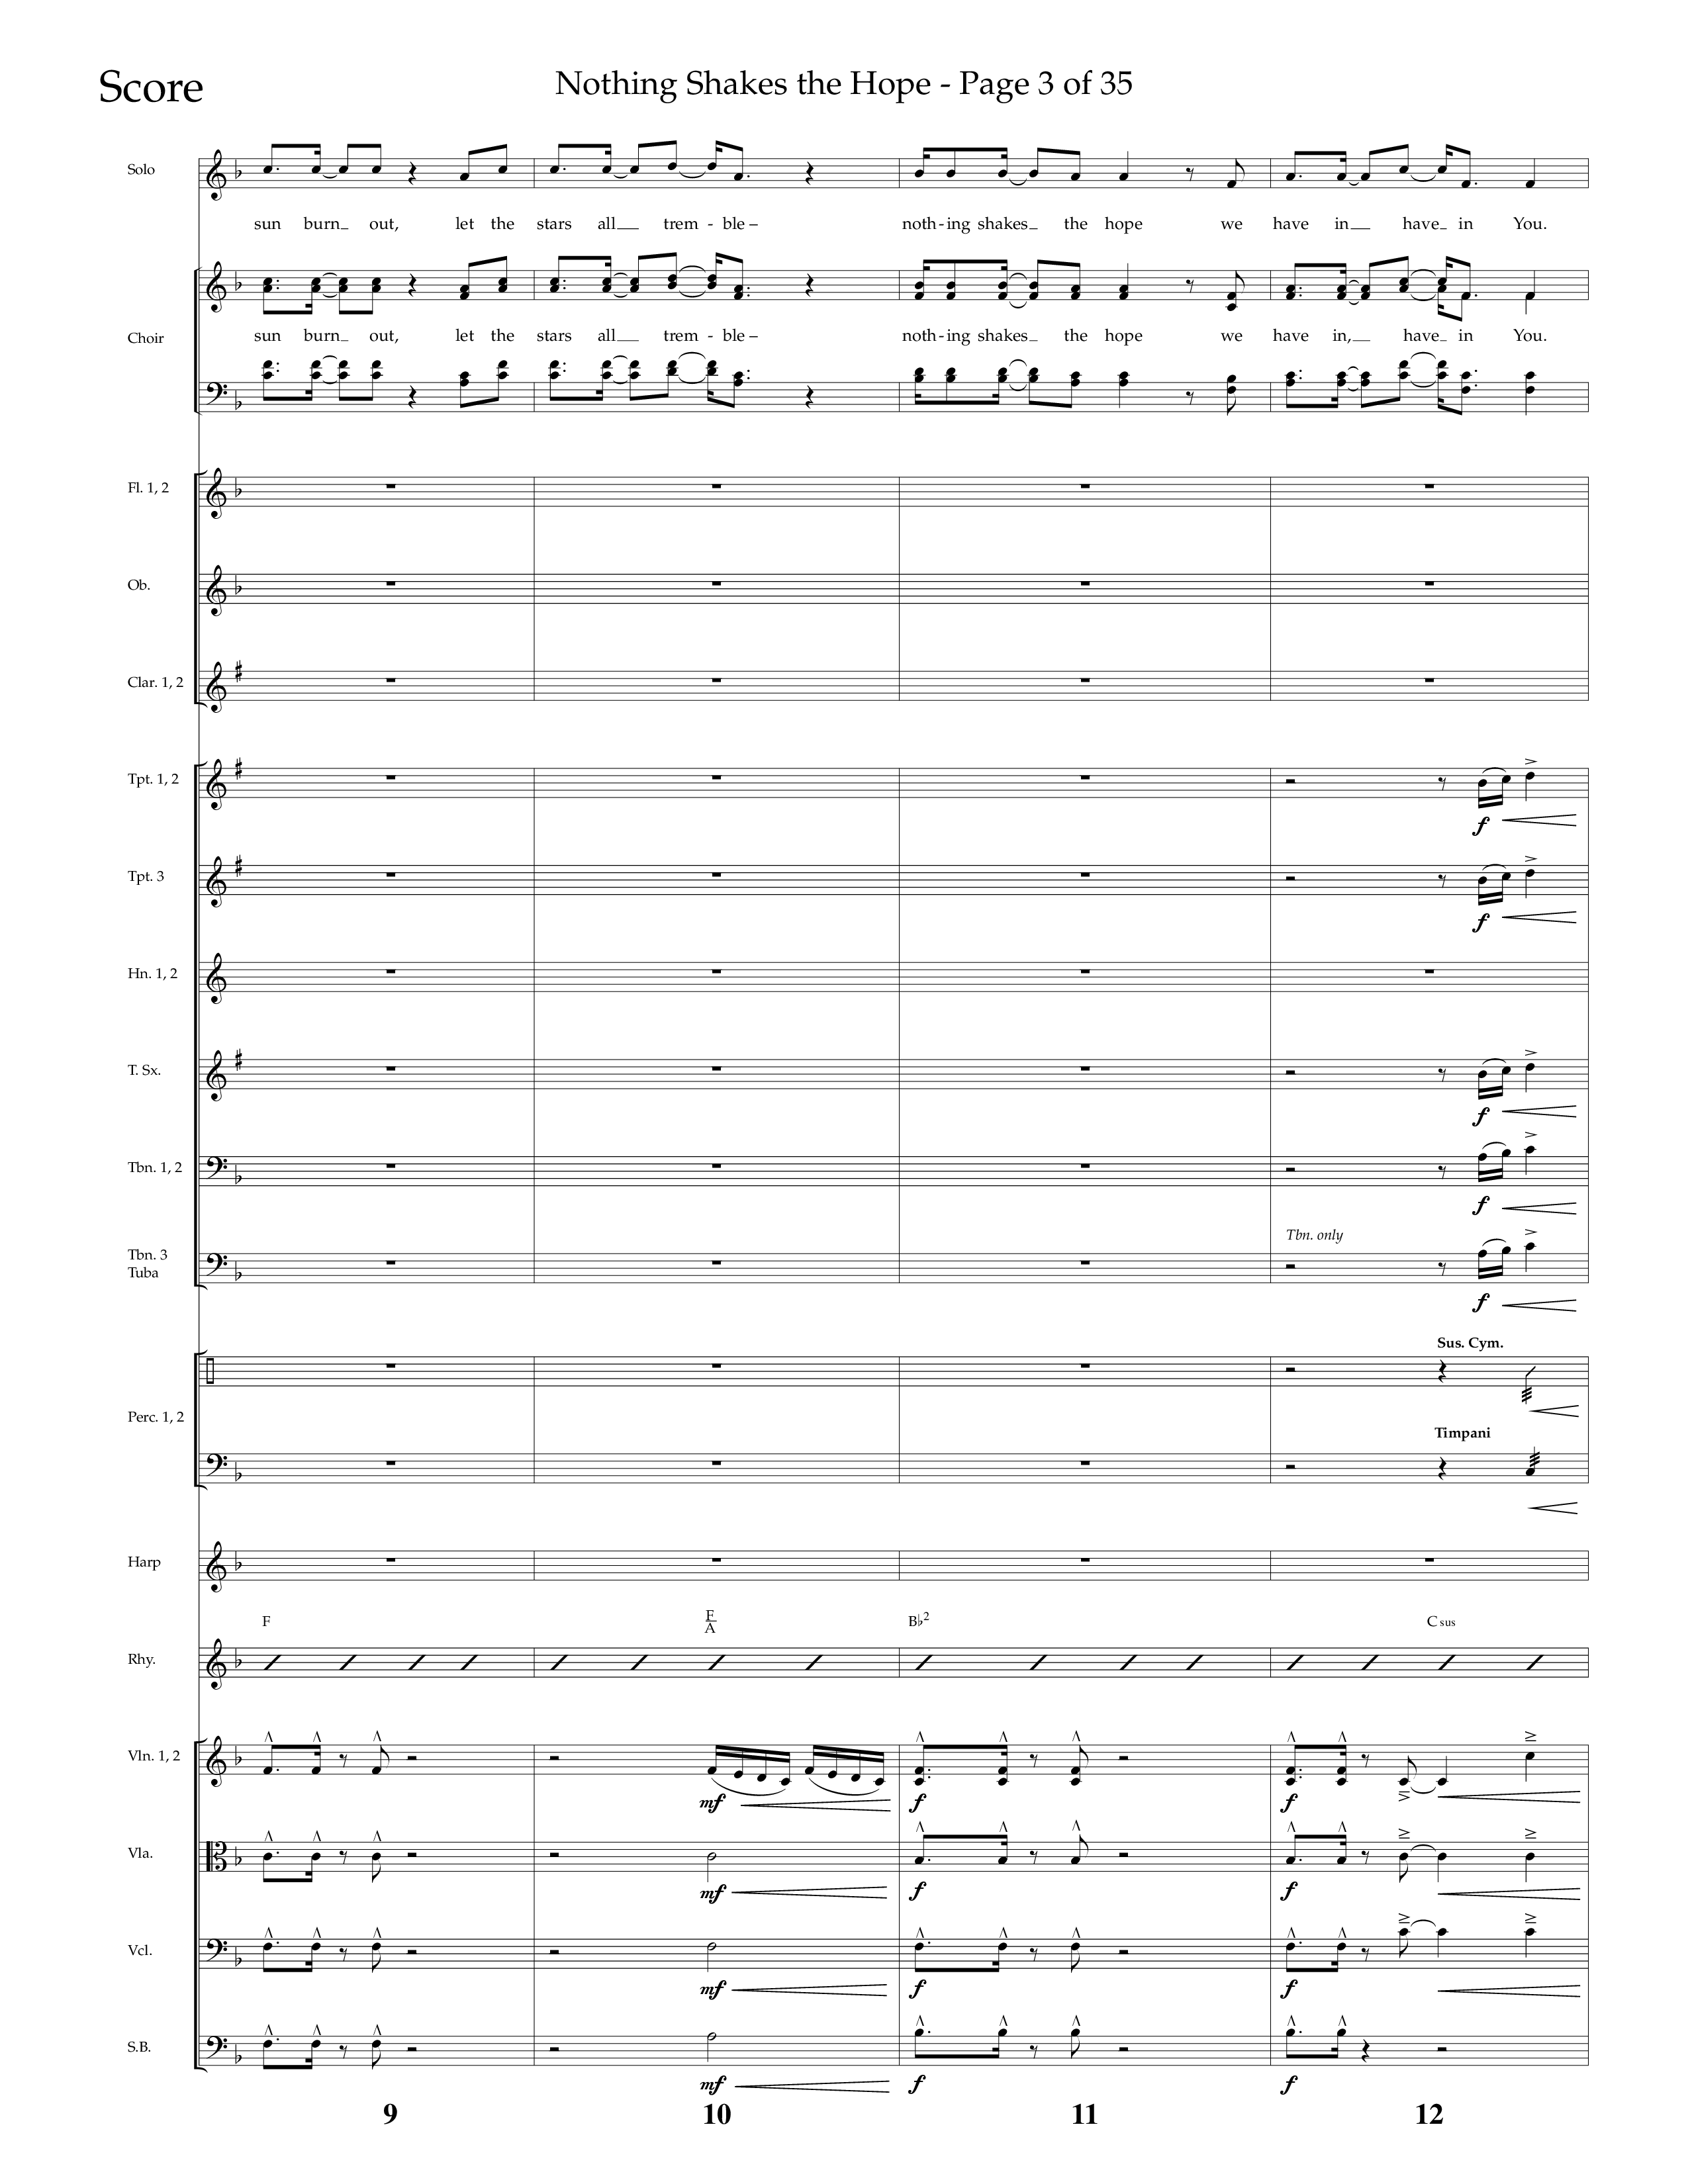 Nothing Shakes The Hope (Choral Anthem SATB) Orchestration (Lifeway Choral / Arr. John Bolin / Arr. Don Koch / Orch. Cliff Duren)